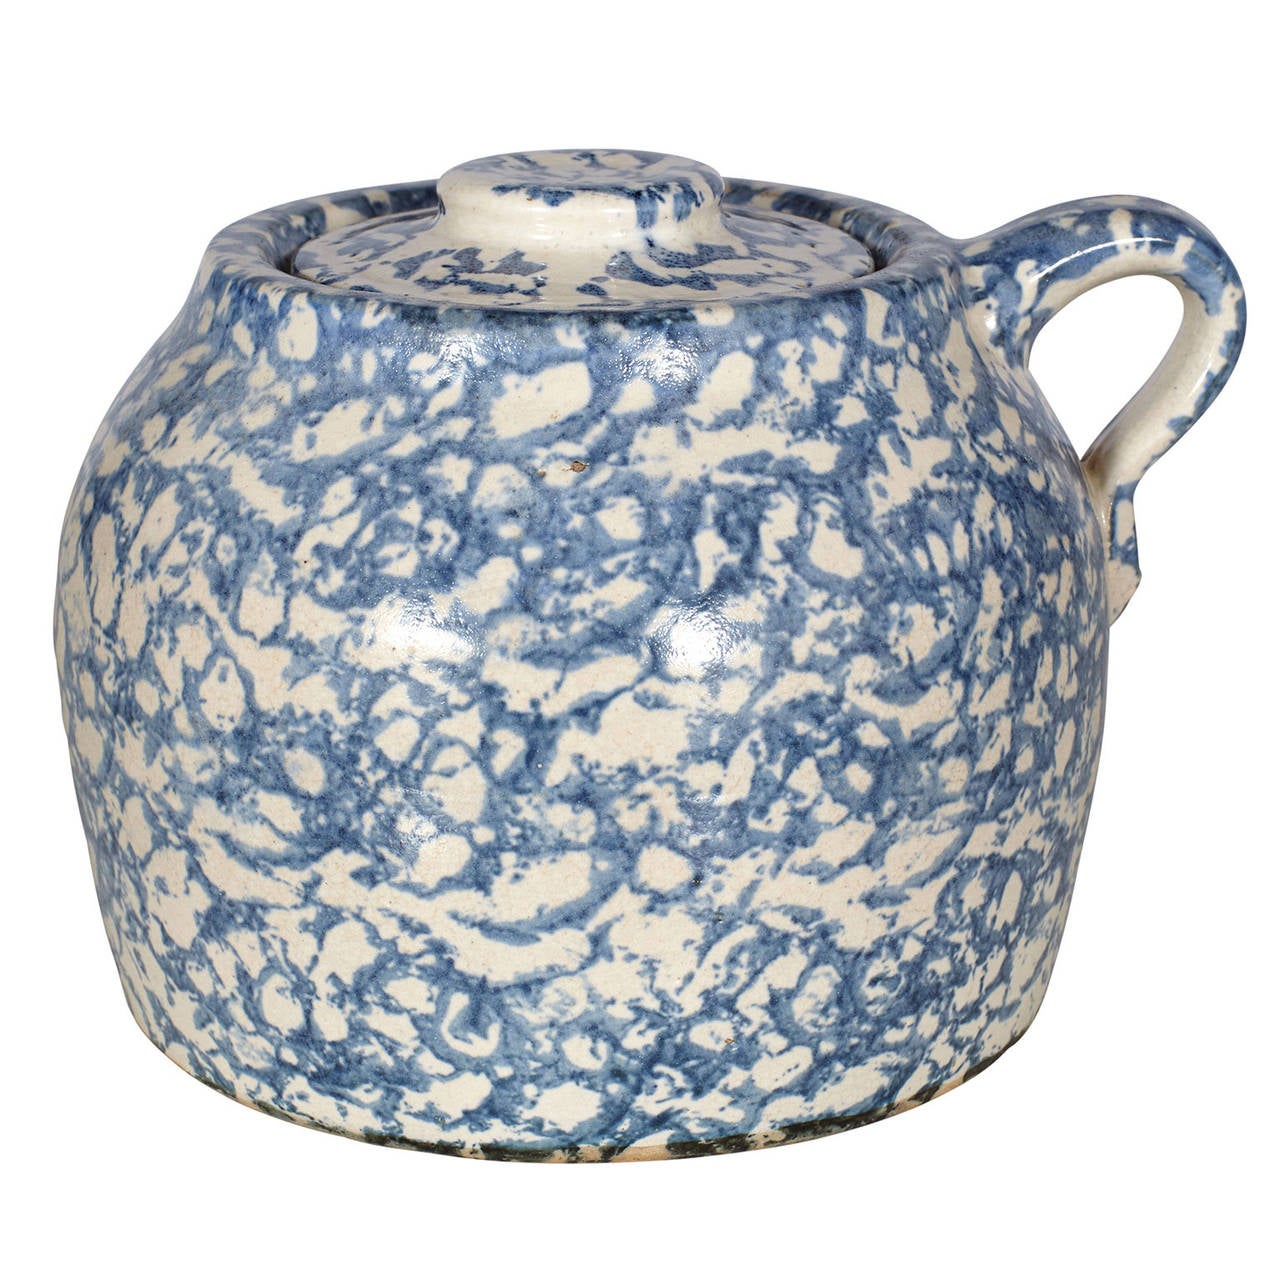 An English hand-turned blue and white spongeware lidded bean pot from 1880s.